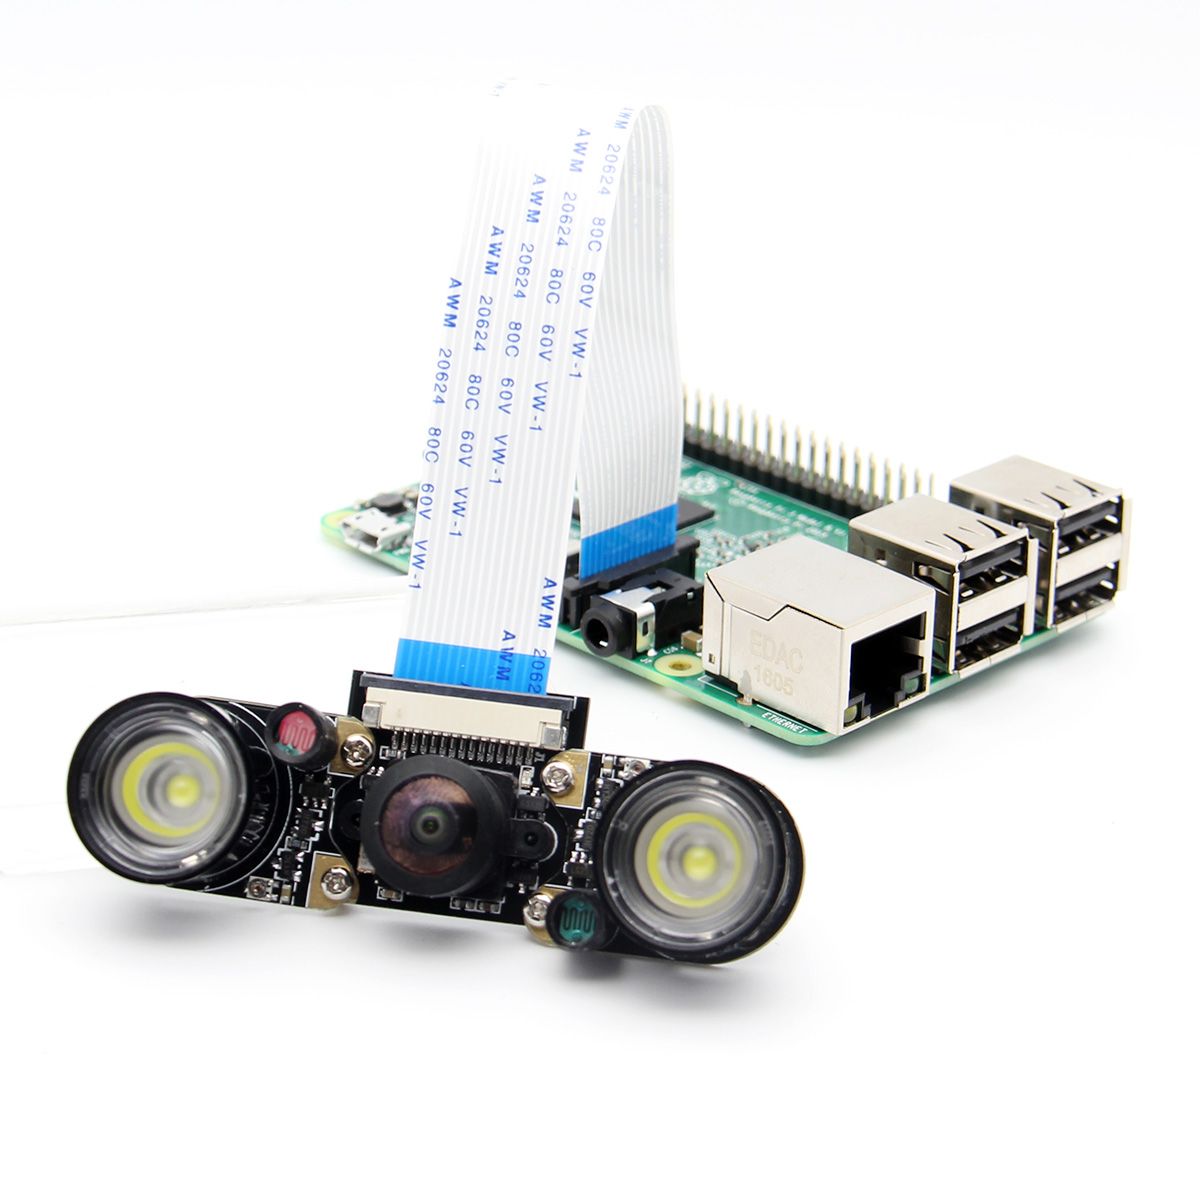 Adjustable-Focus-HD-175-Degree-Wide-Angle-Panoramic-Camera-Module--2-LED-Board-For-Raspberry-Pi-1049619